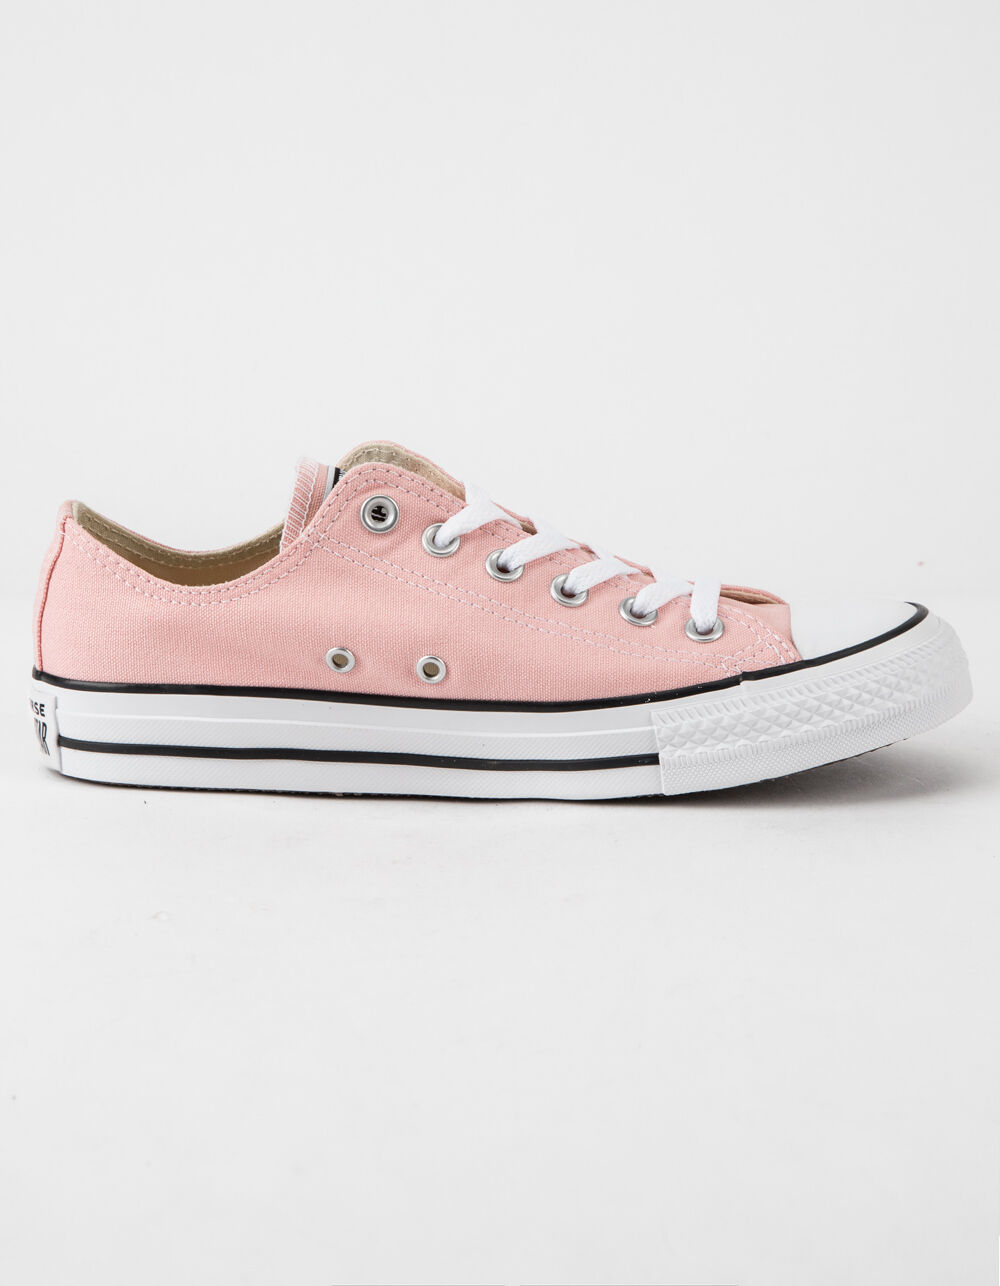 UPC 888755884034 product image for CONVERSE Chuck Taylor All Star Storm Pink Low Top Shoes | upcitemdb.com